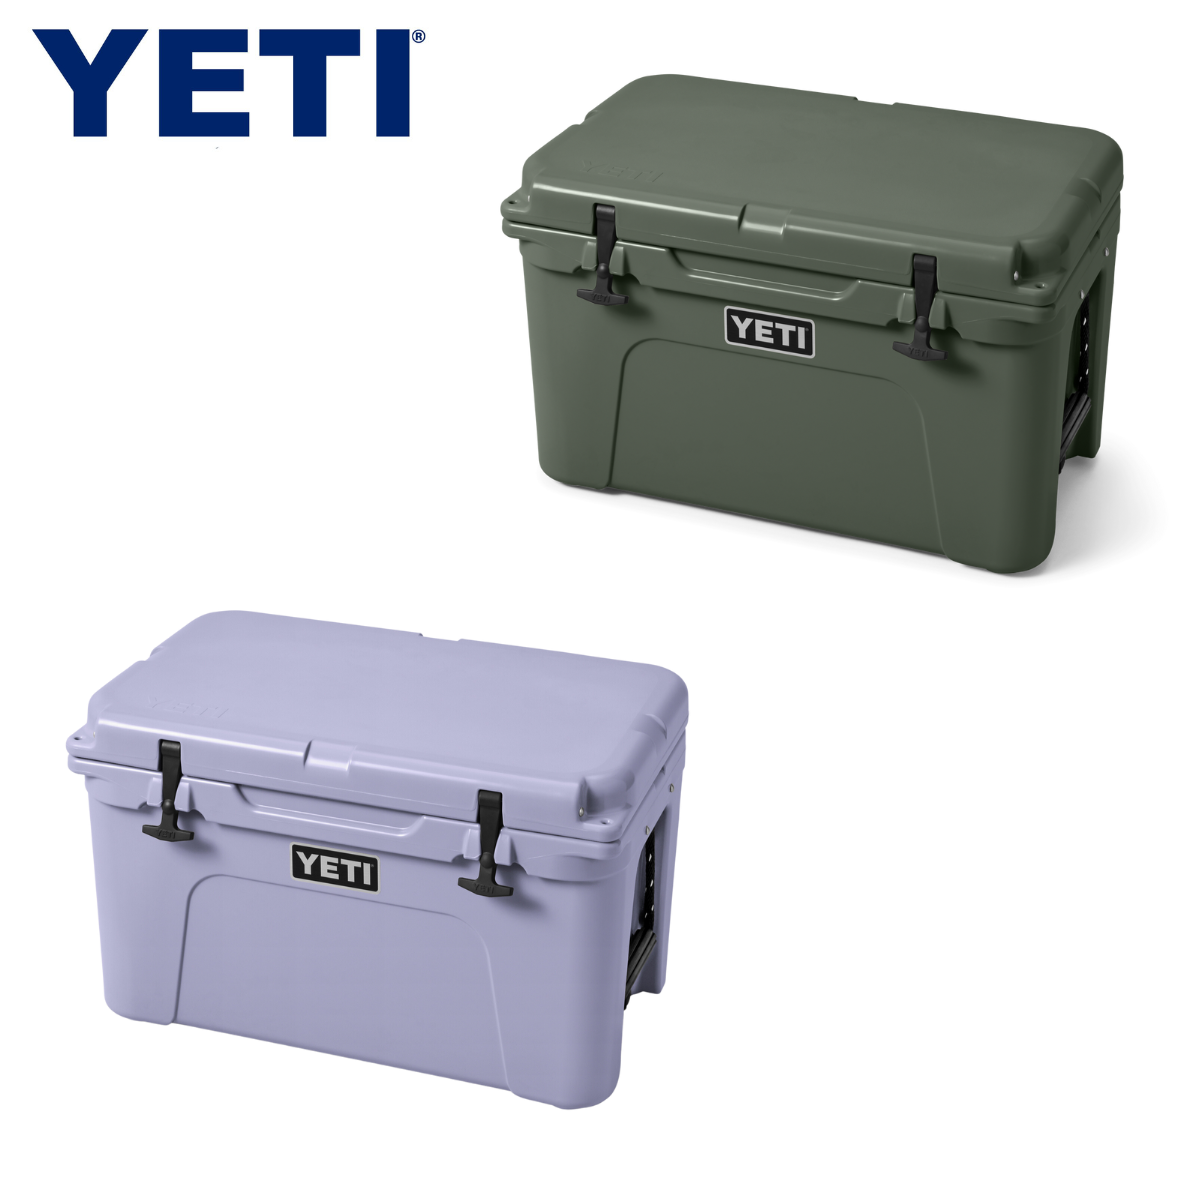 Tundra 45 Limited Edition Cooler